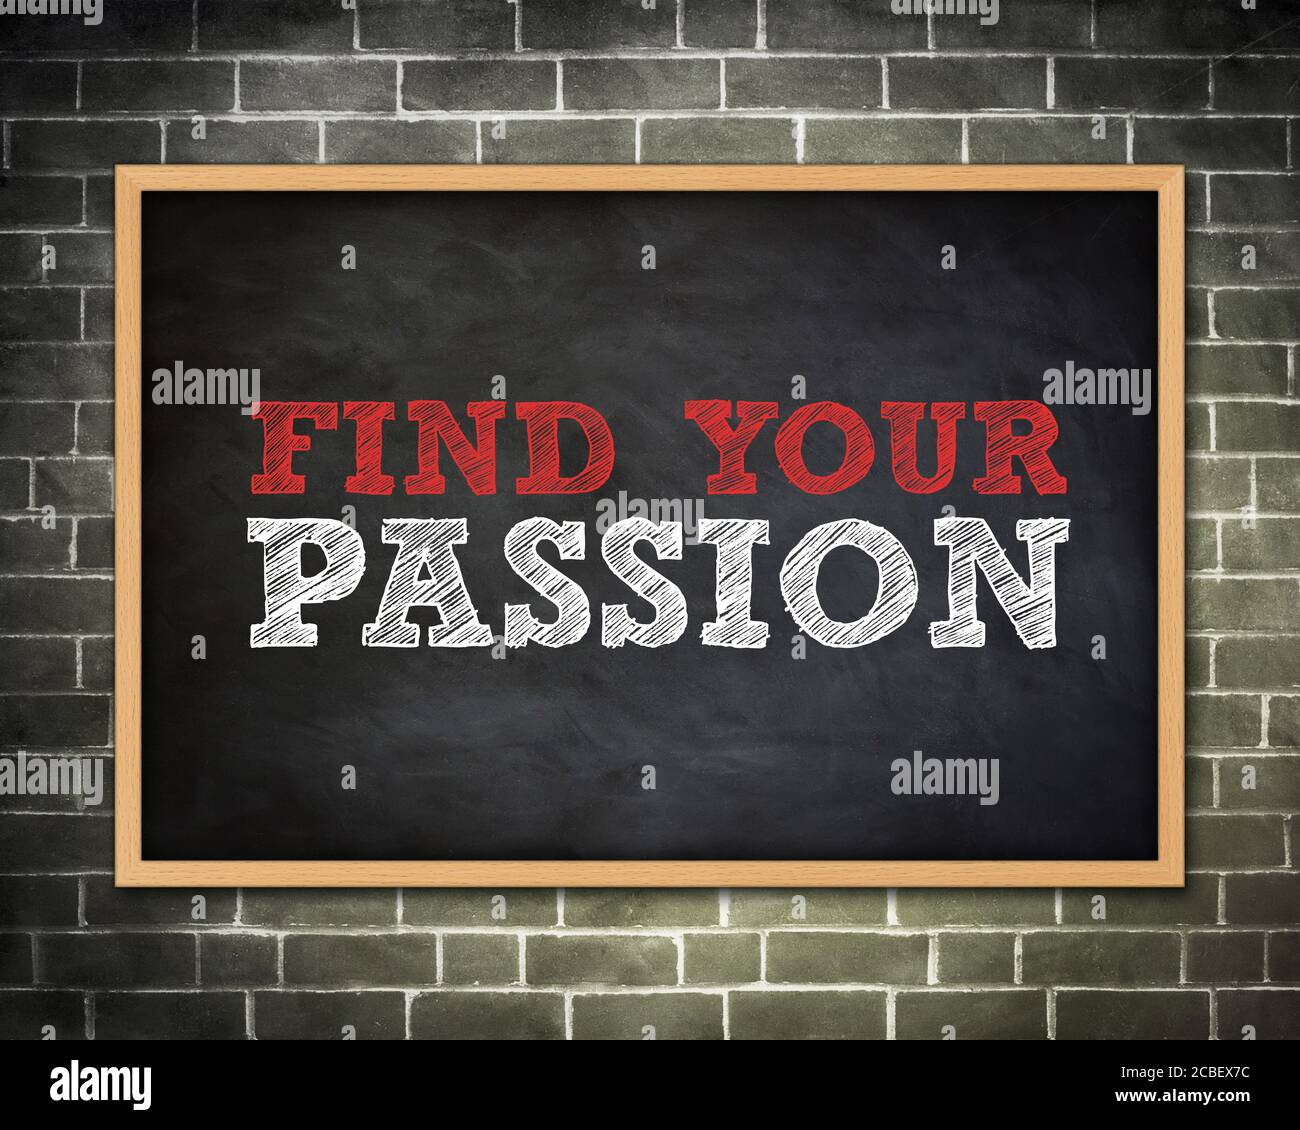 FIND YOUR PASSION - blackboard concept Stock Photo